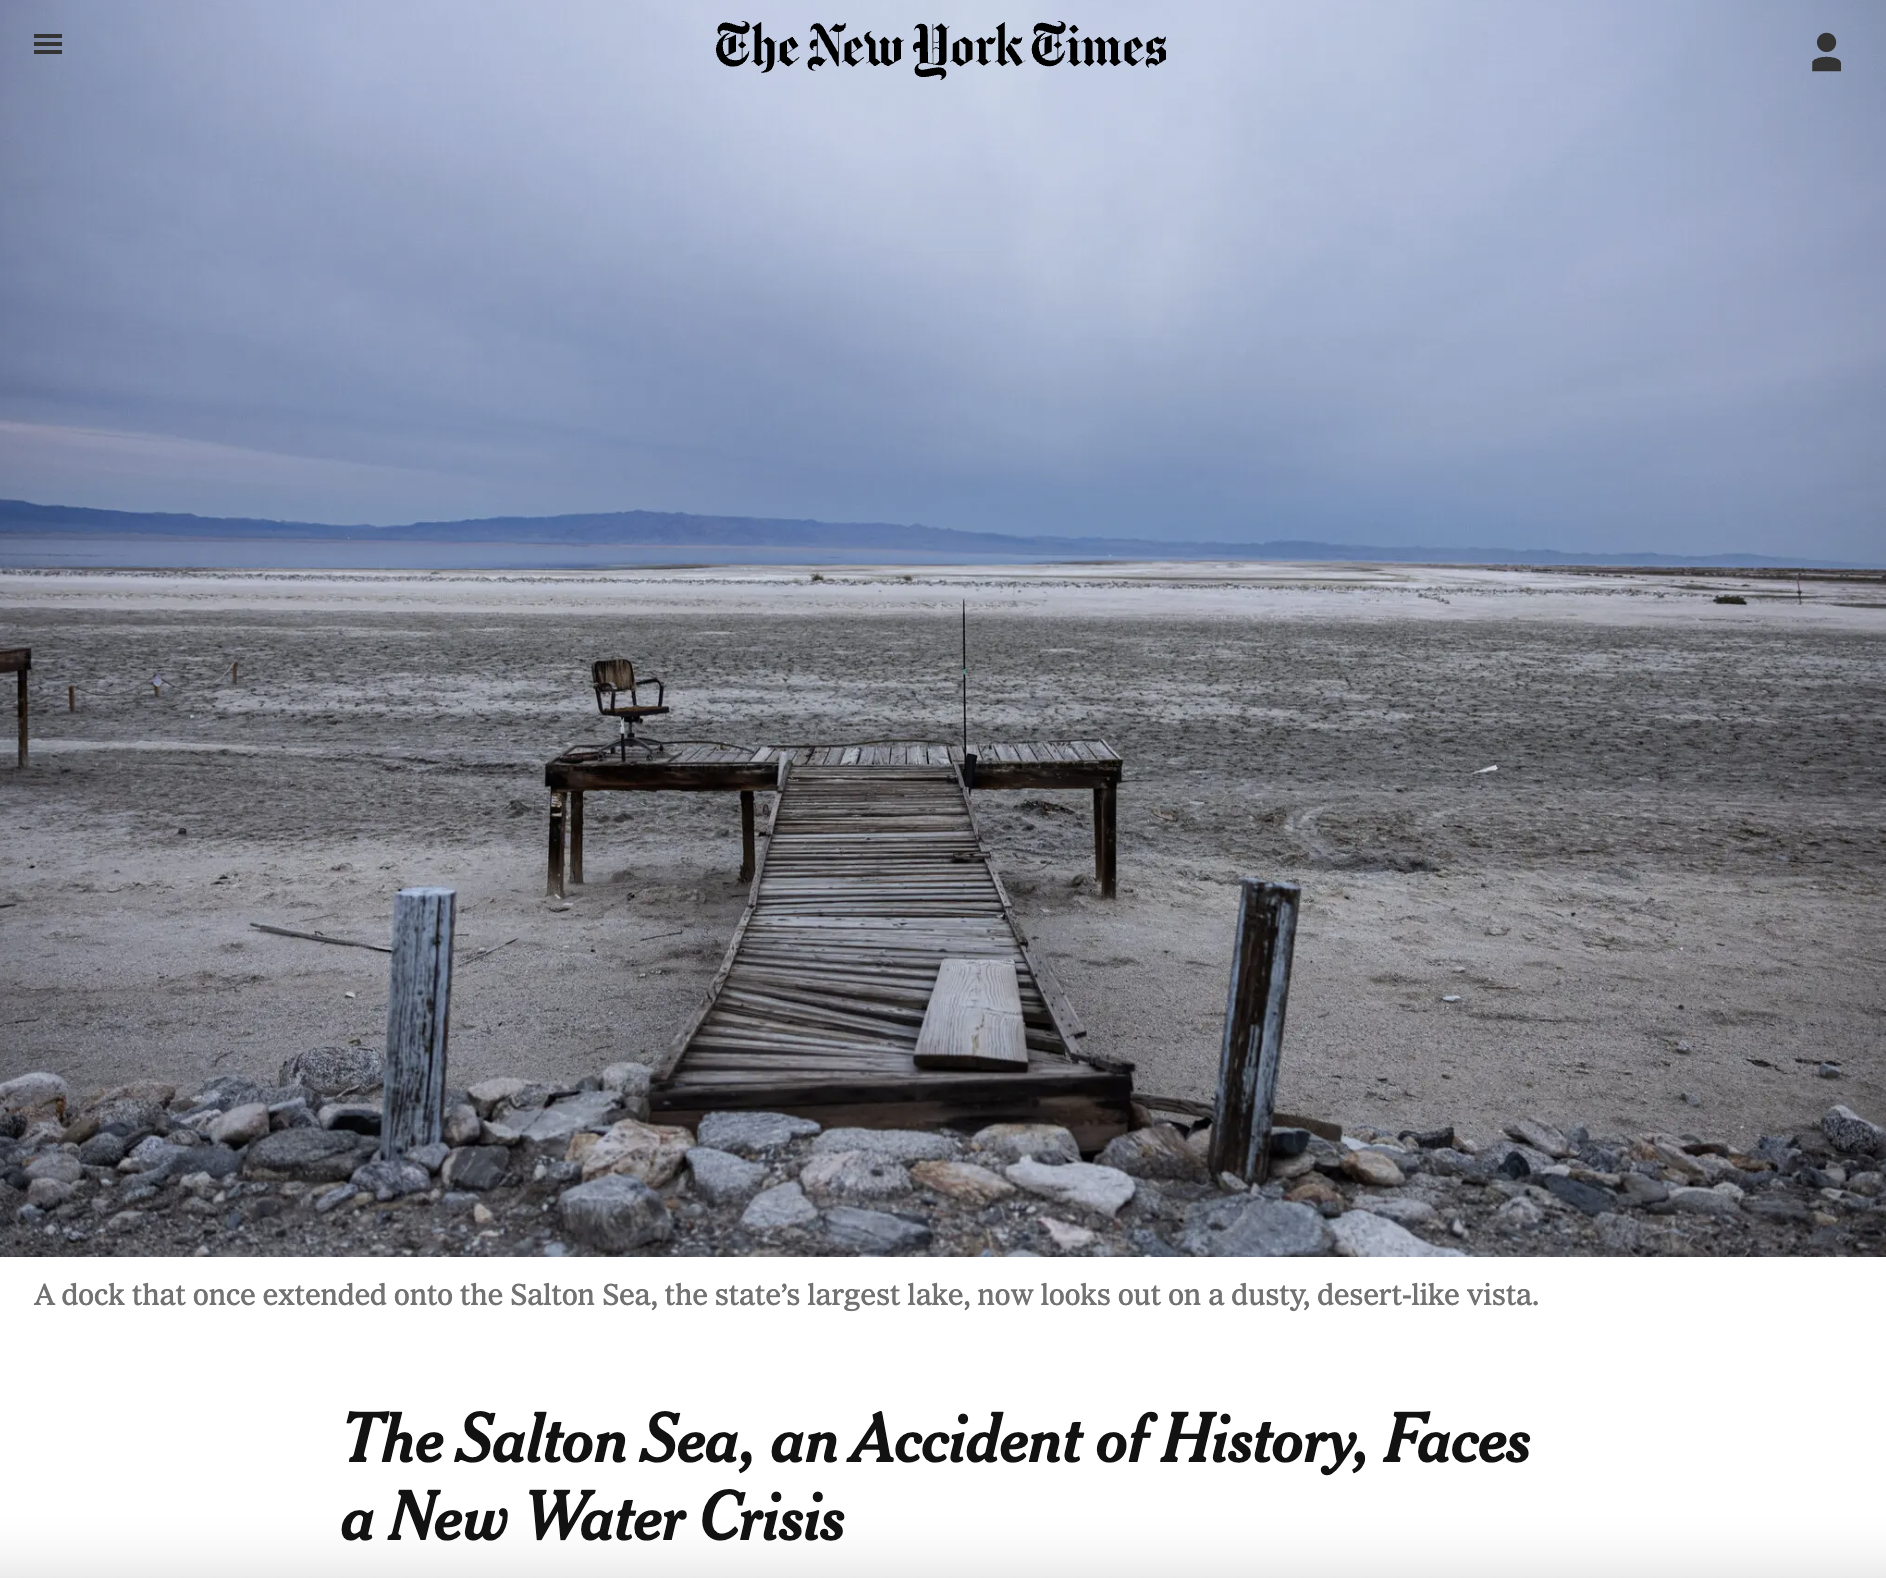 Thumbnail of The Salton Sea, An Accident of History, Faces a New water Cisis